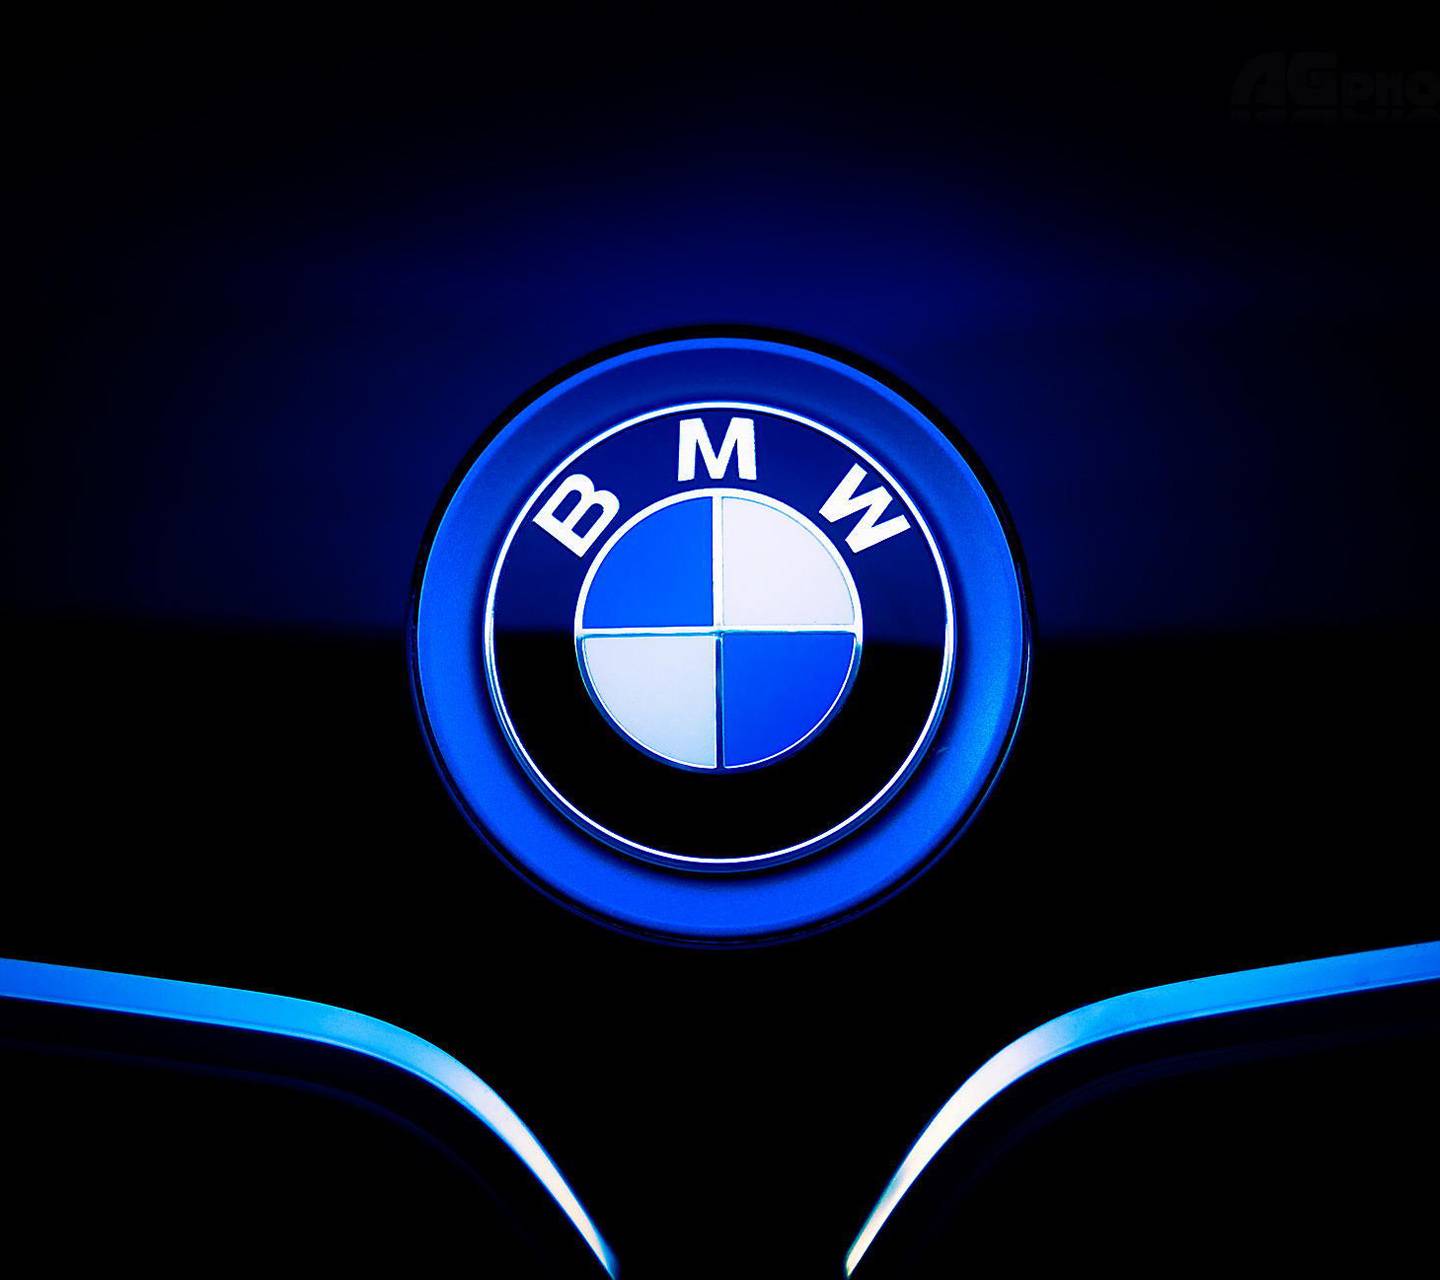 Download free car logo wallpaper for your mobile phone